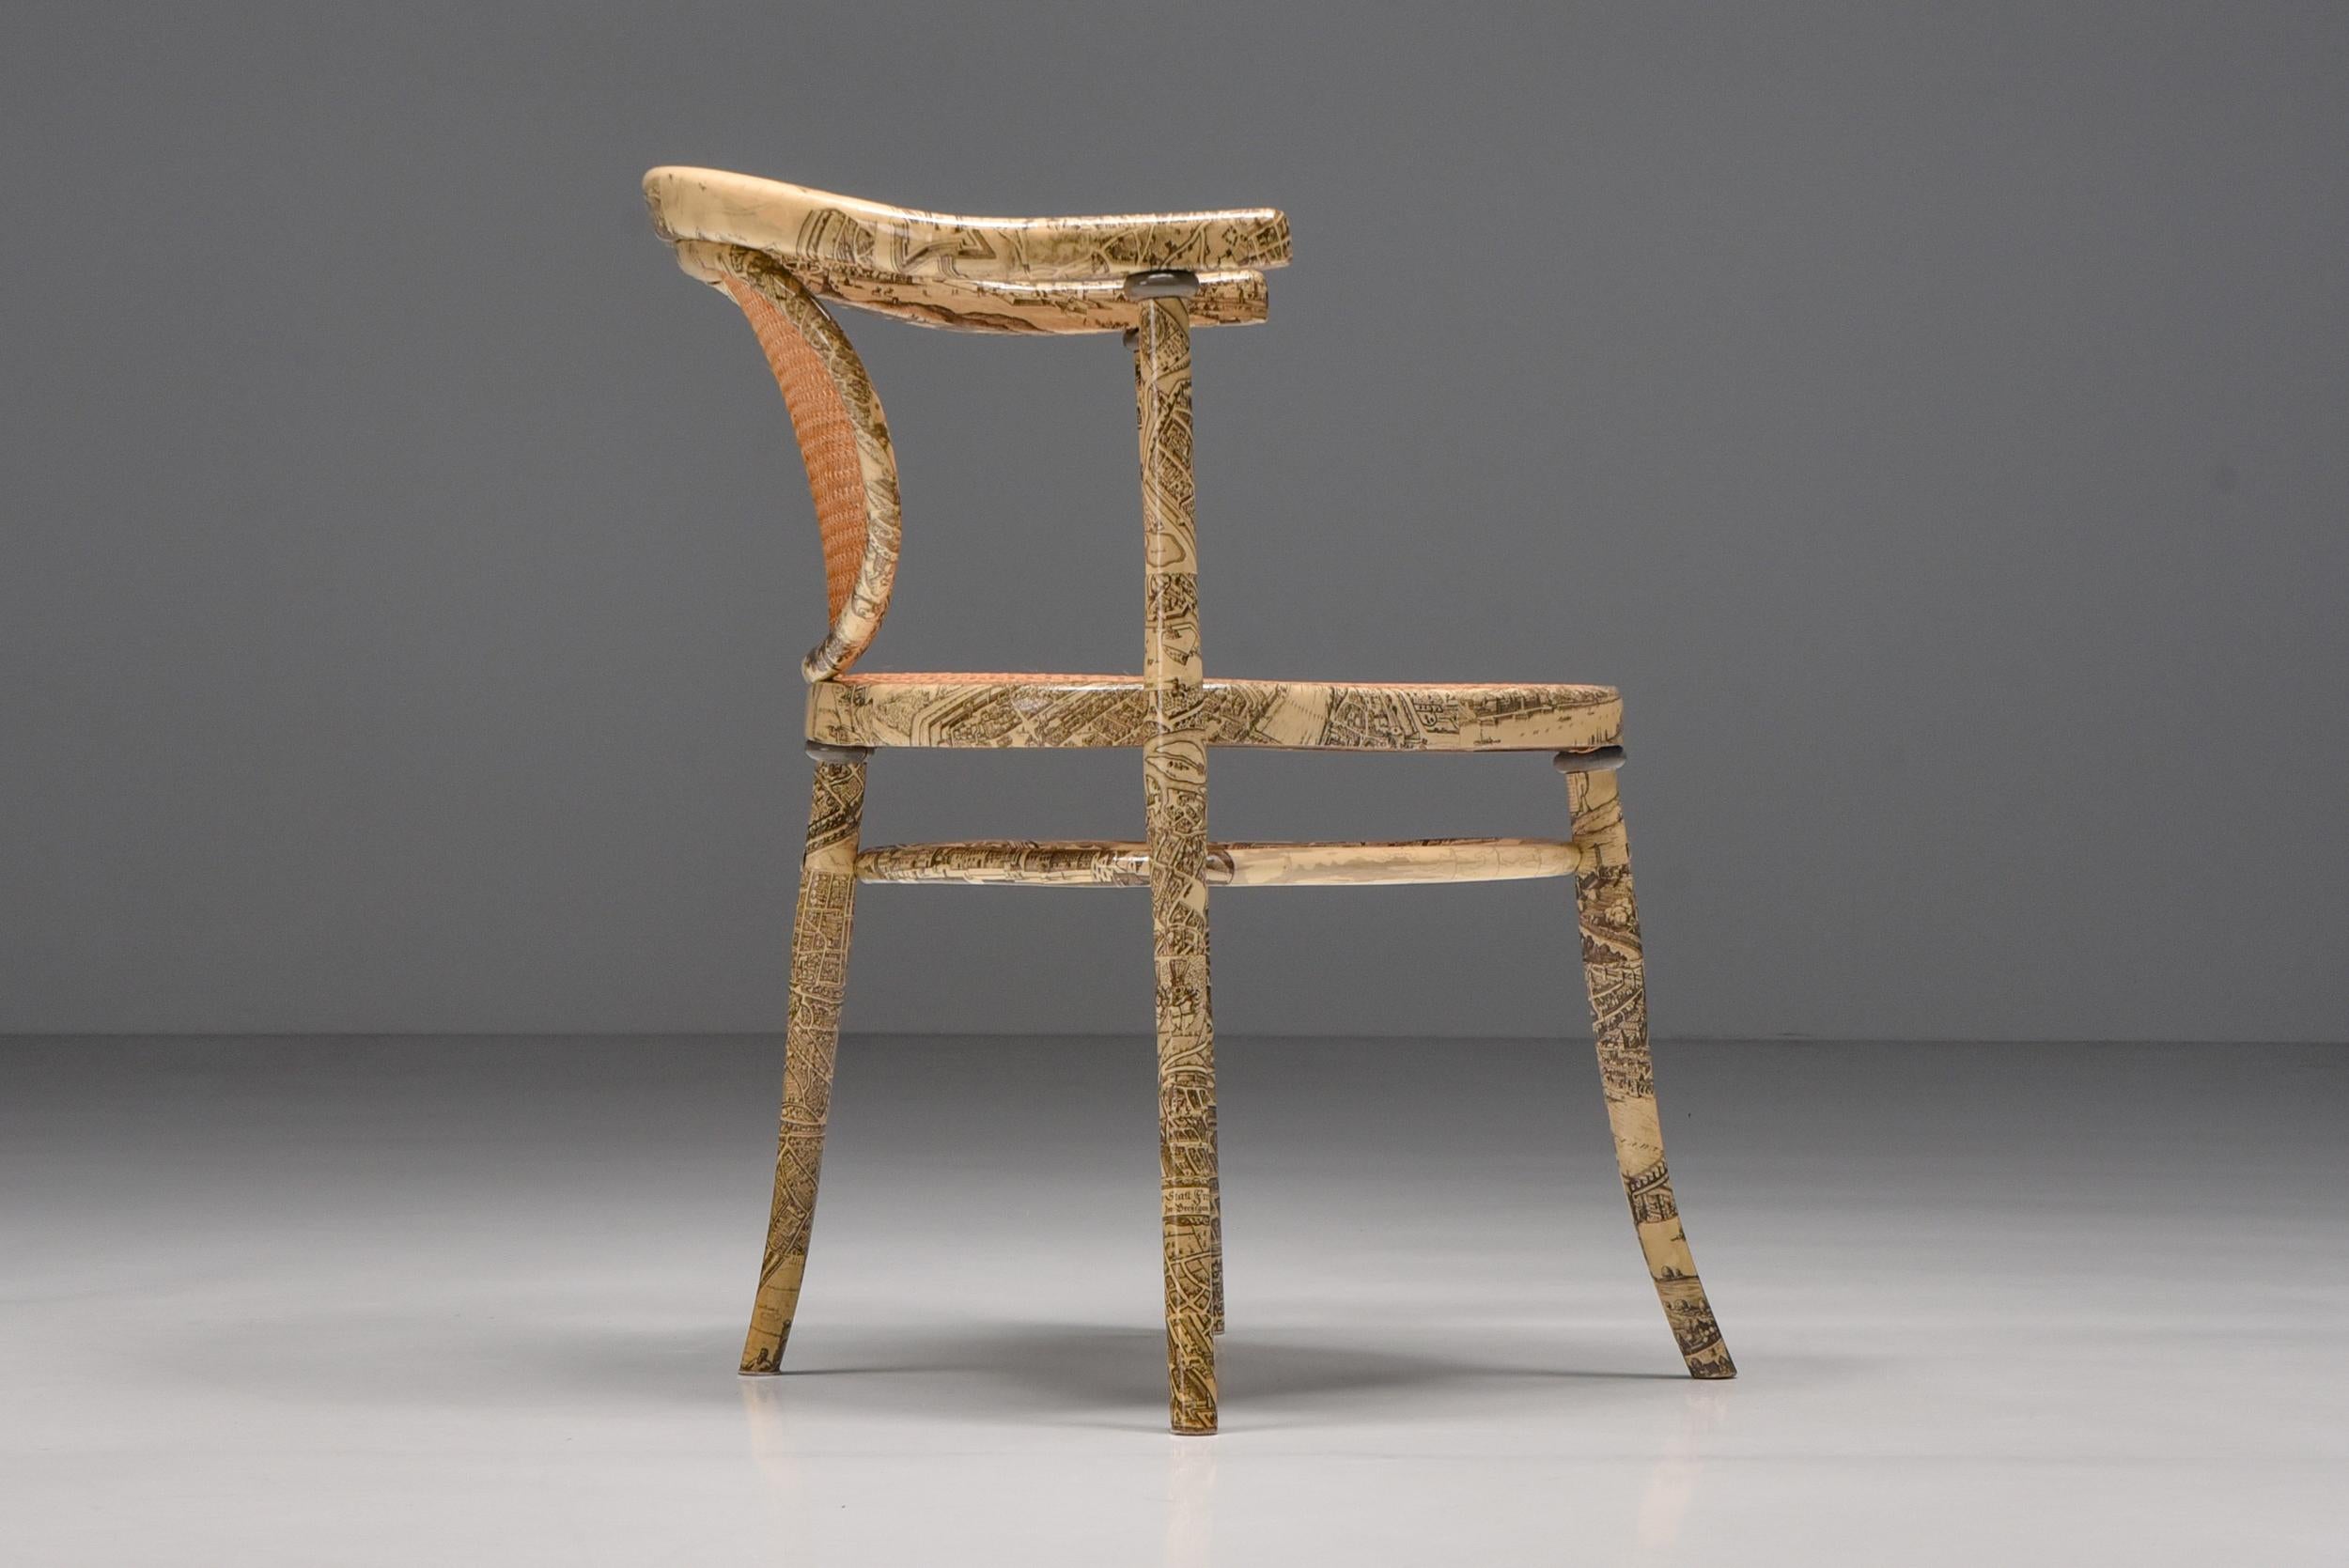 Thonet; Fornasetti; Empire; 1905; Germany; Lounge chair; Armchair; Asymmetrical chair; saddle-shaped seat;

This asymmetrical chair from Thonet features a saddle-shaped seat. The seat and backrest are woven in rattan. The frame has later been